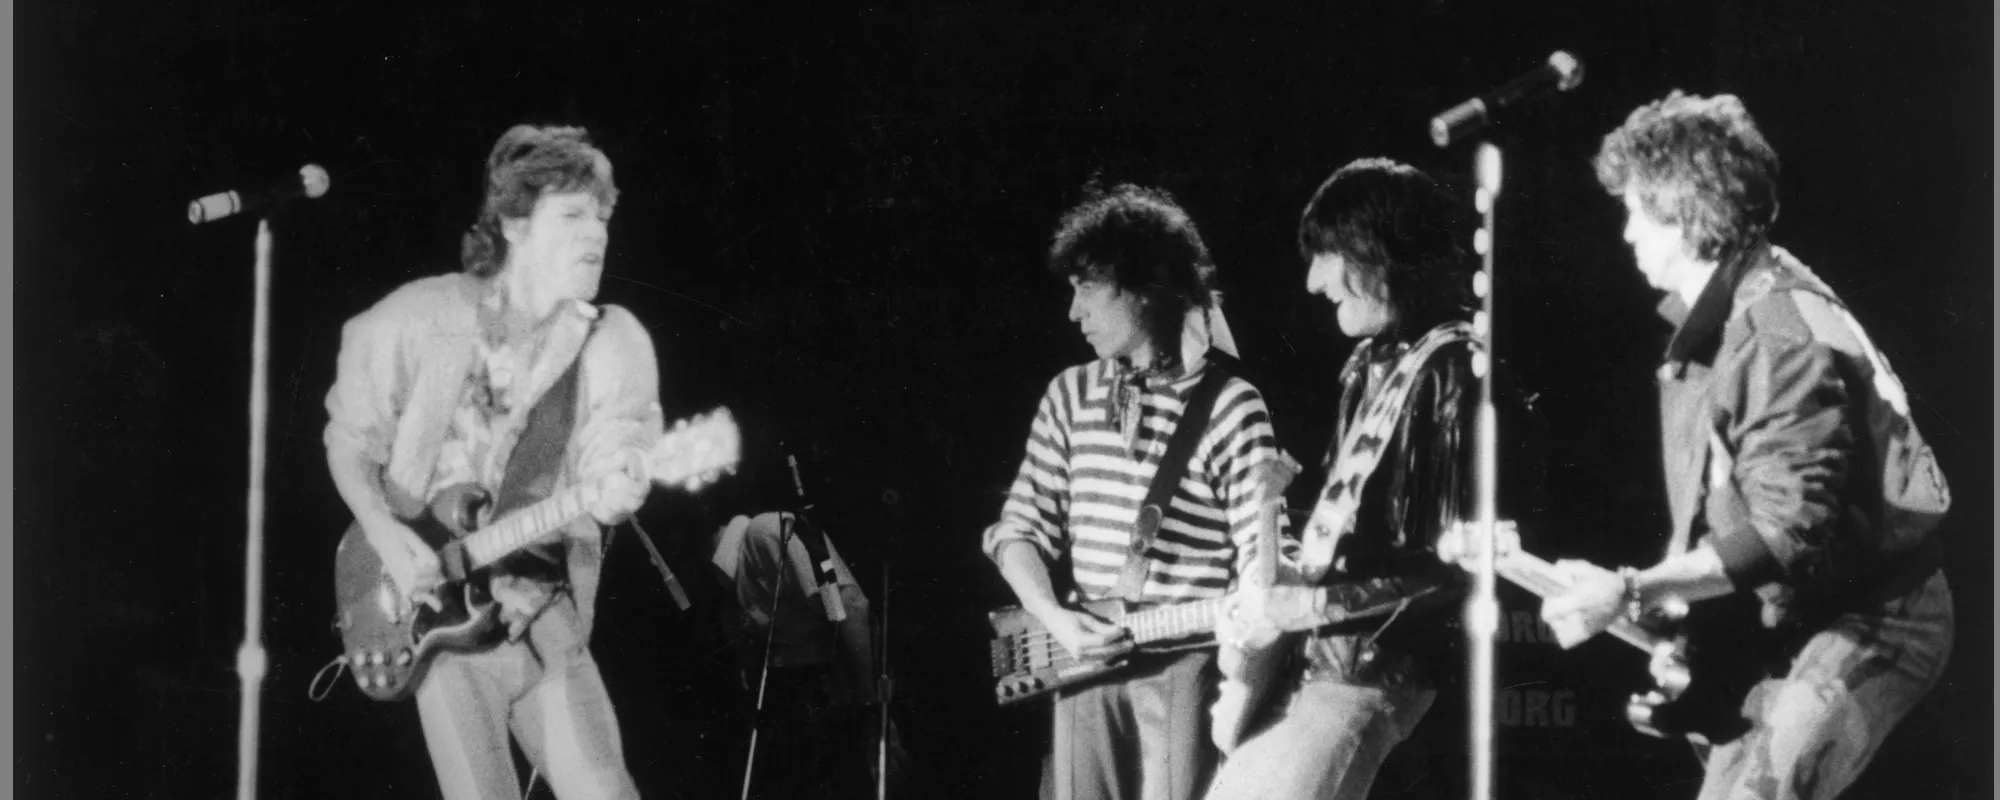 5 Top Rolling Stones Albums That Shaped Rock Music History